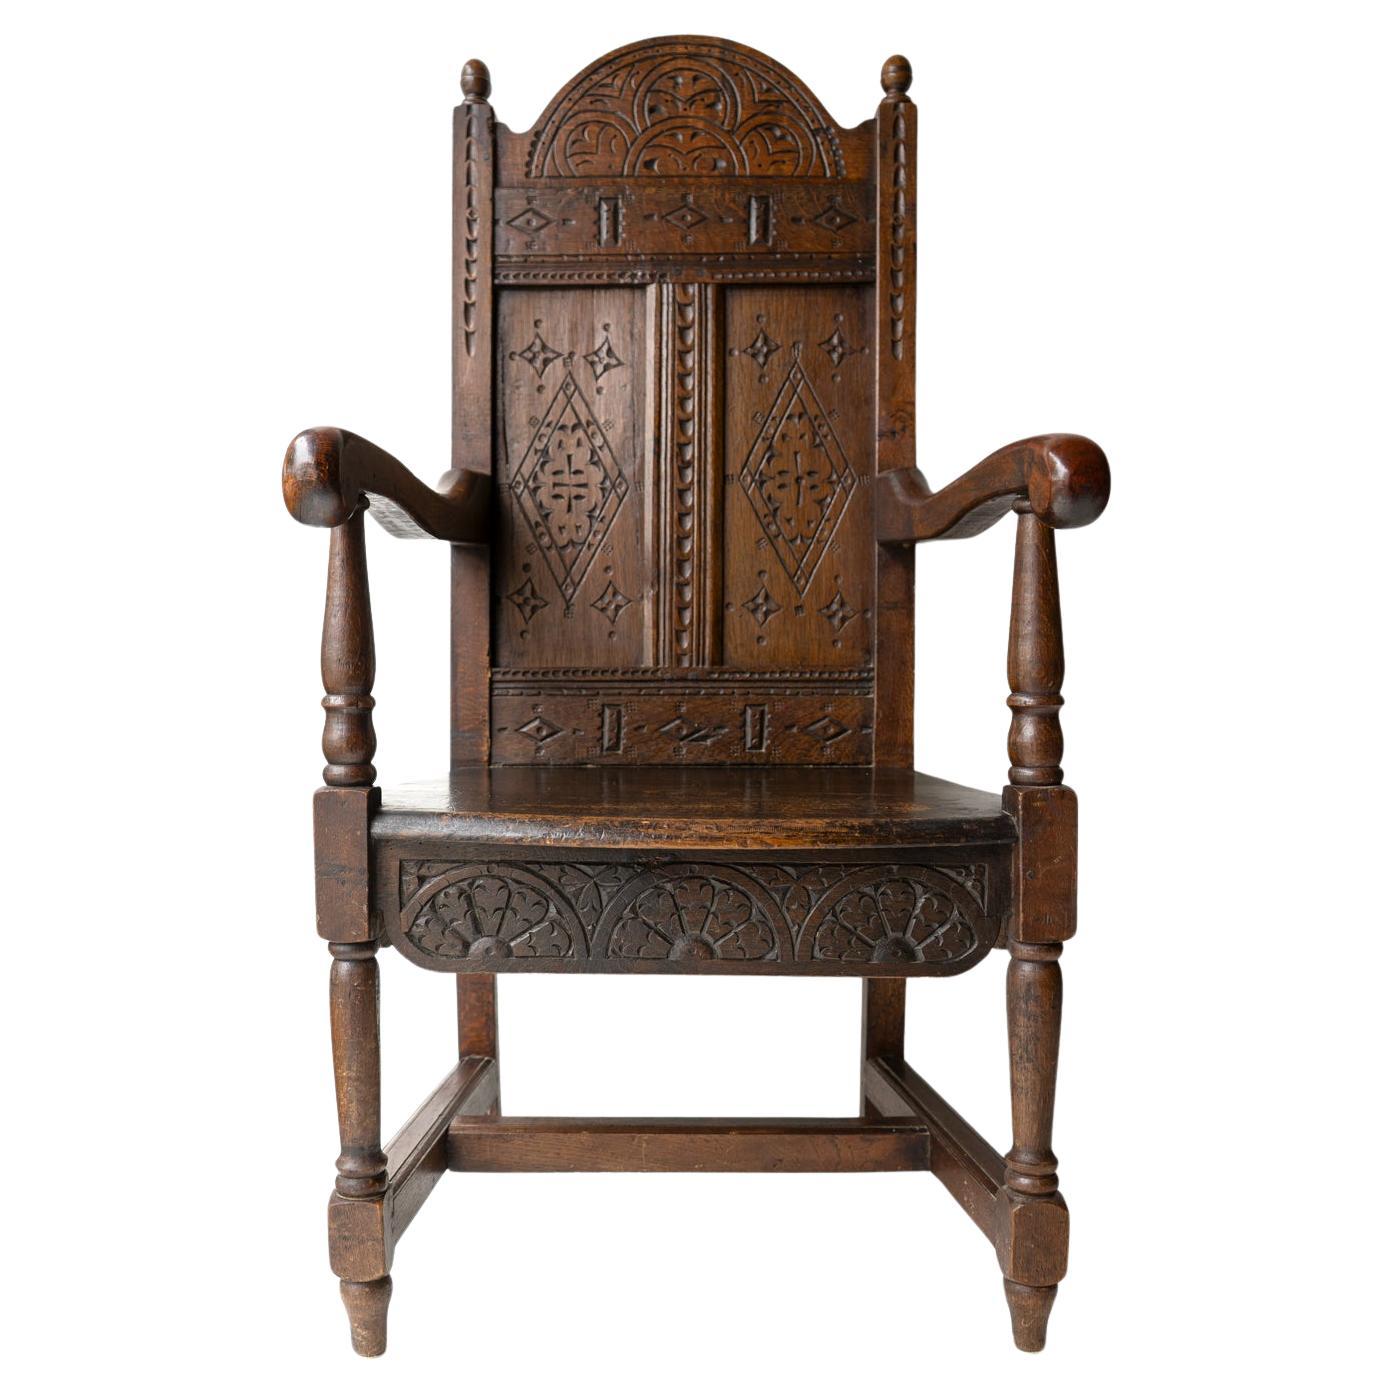 Antique Charles II Carved Oak Wainscot Chair, 17th Century Armchair